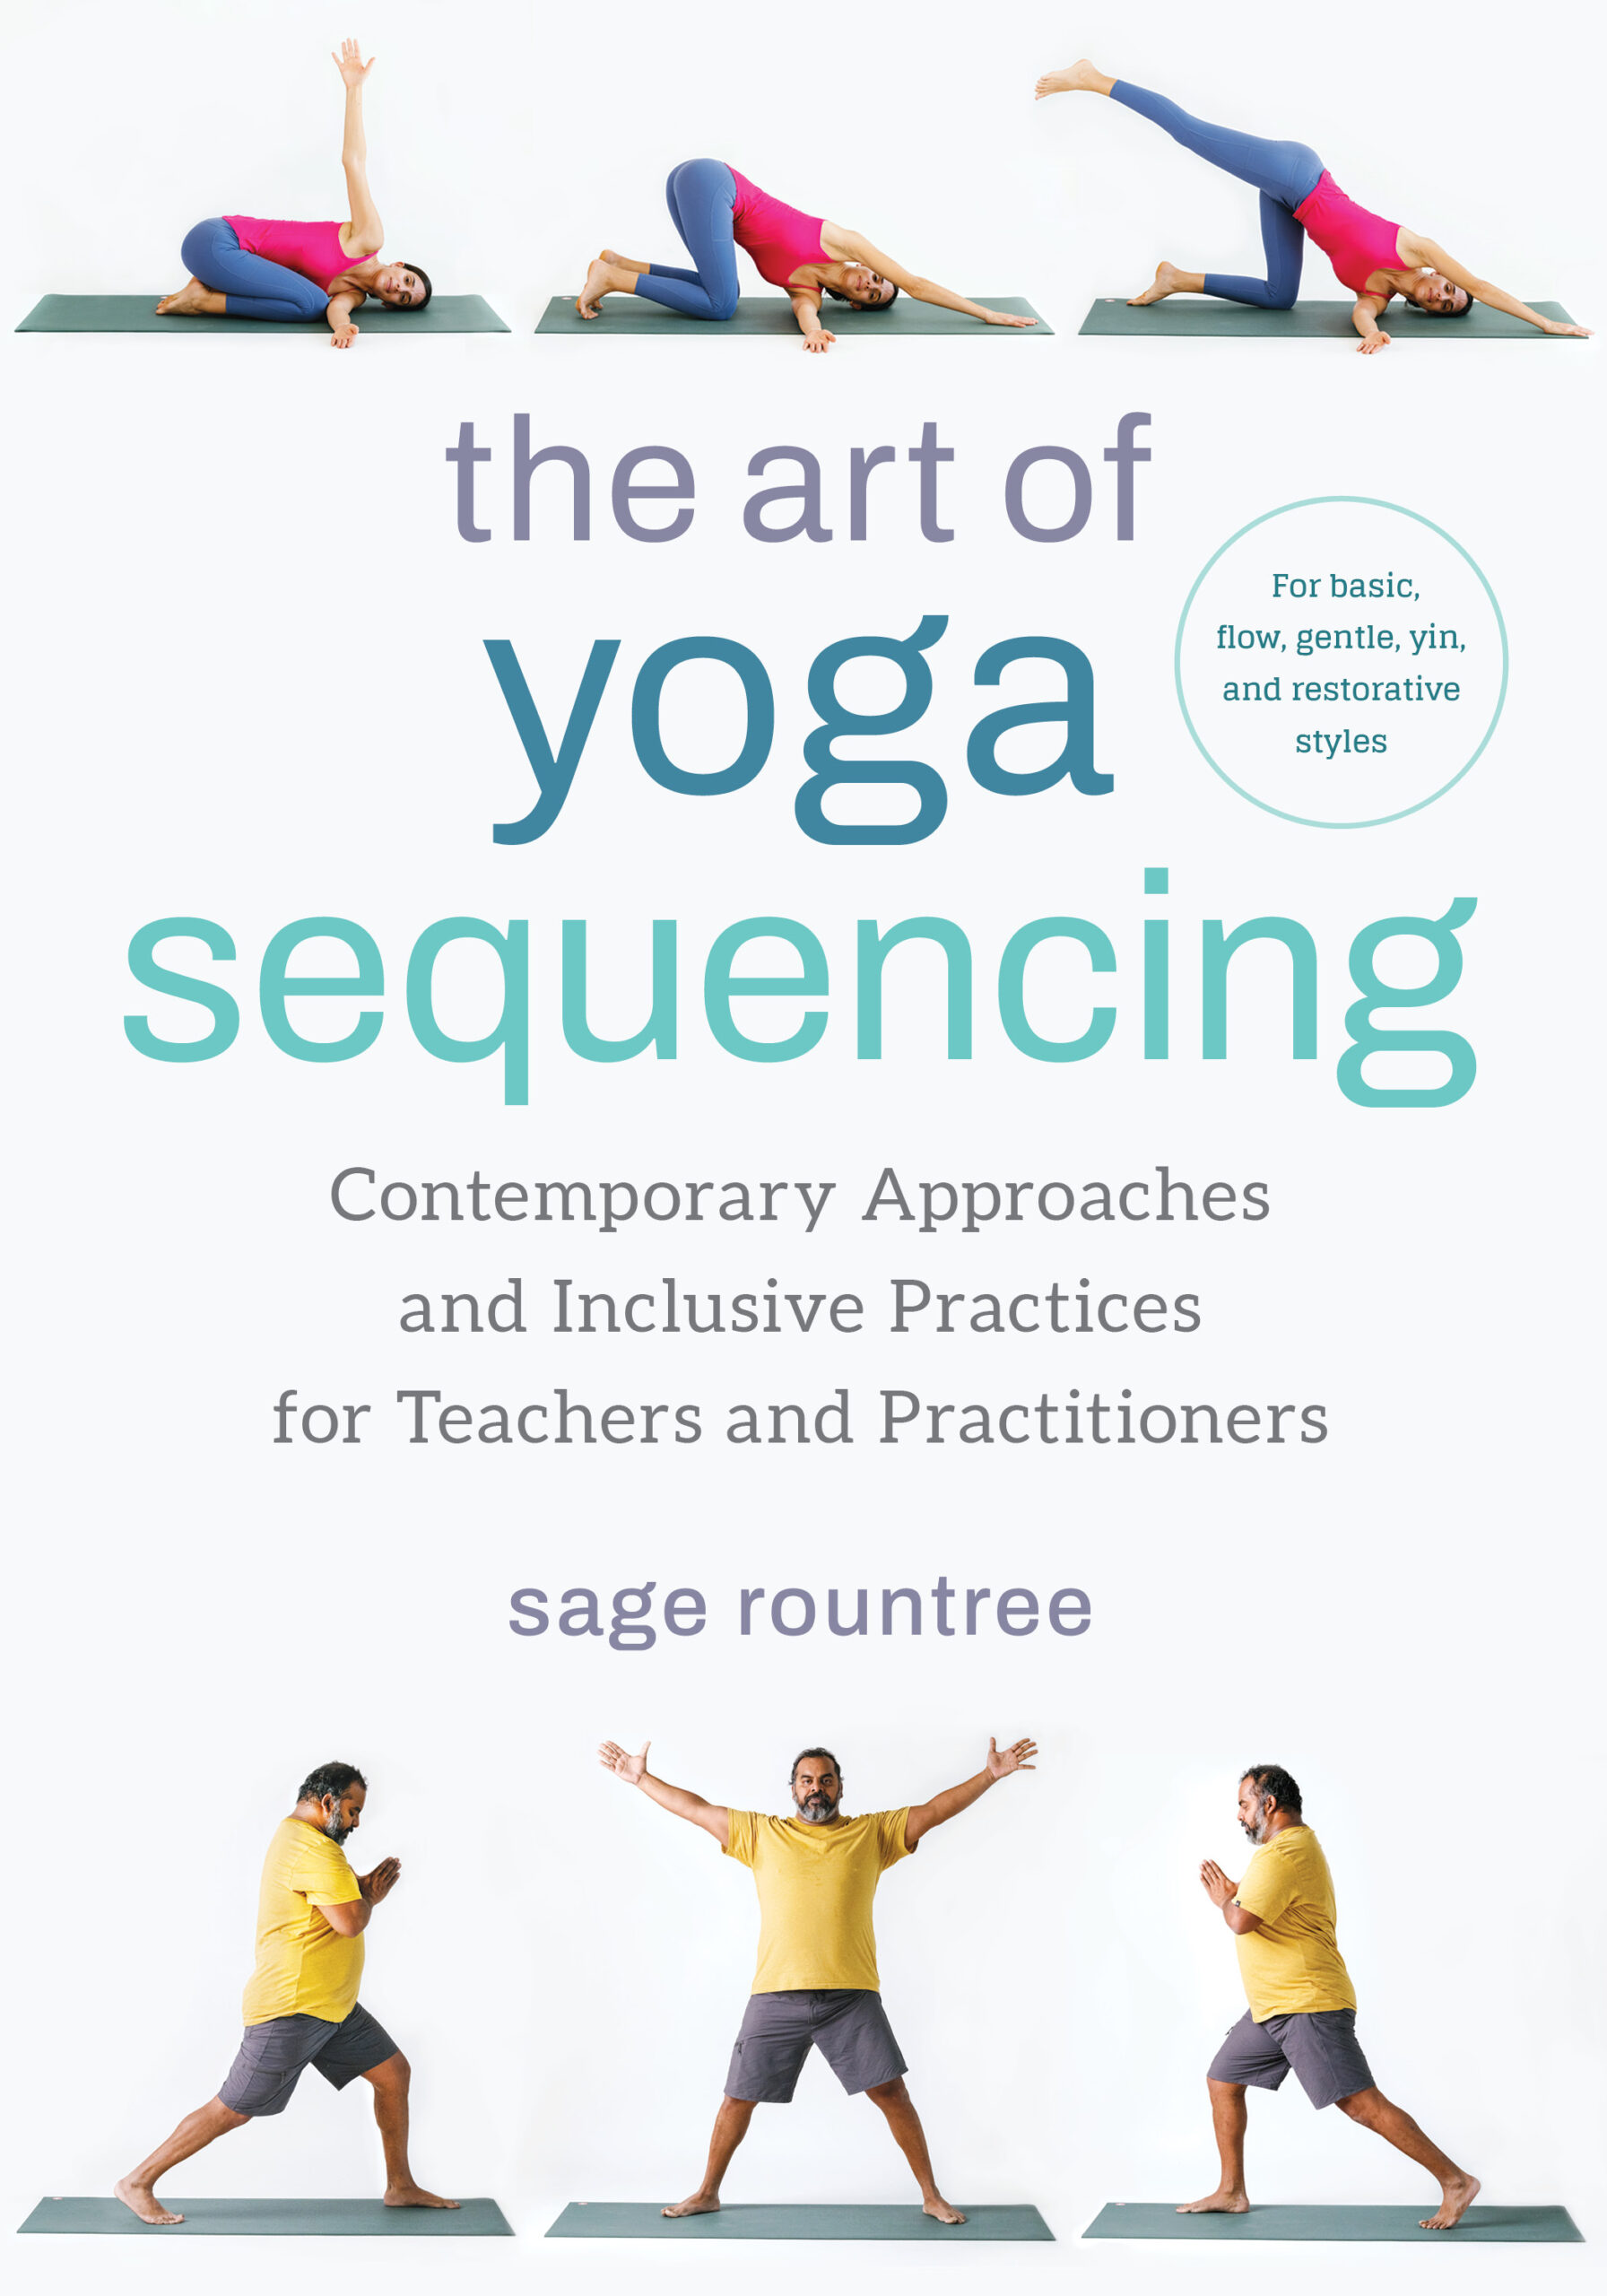 https://sagerountree.com/wp-content/uploads/2023/07/The-Art-of-Yoga-Sequencing-scaled-1.jpg